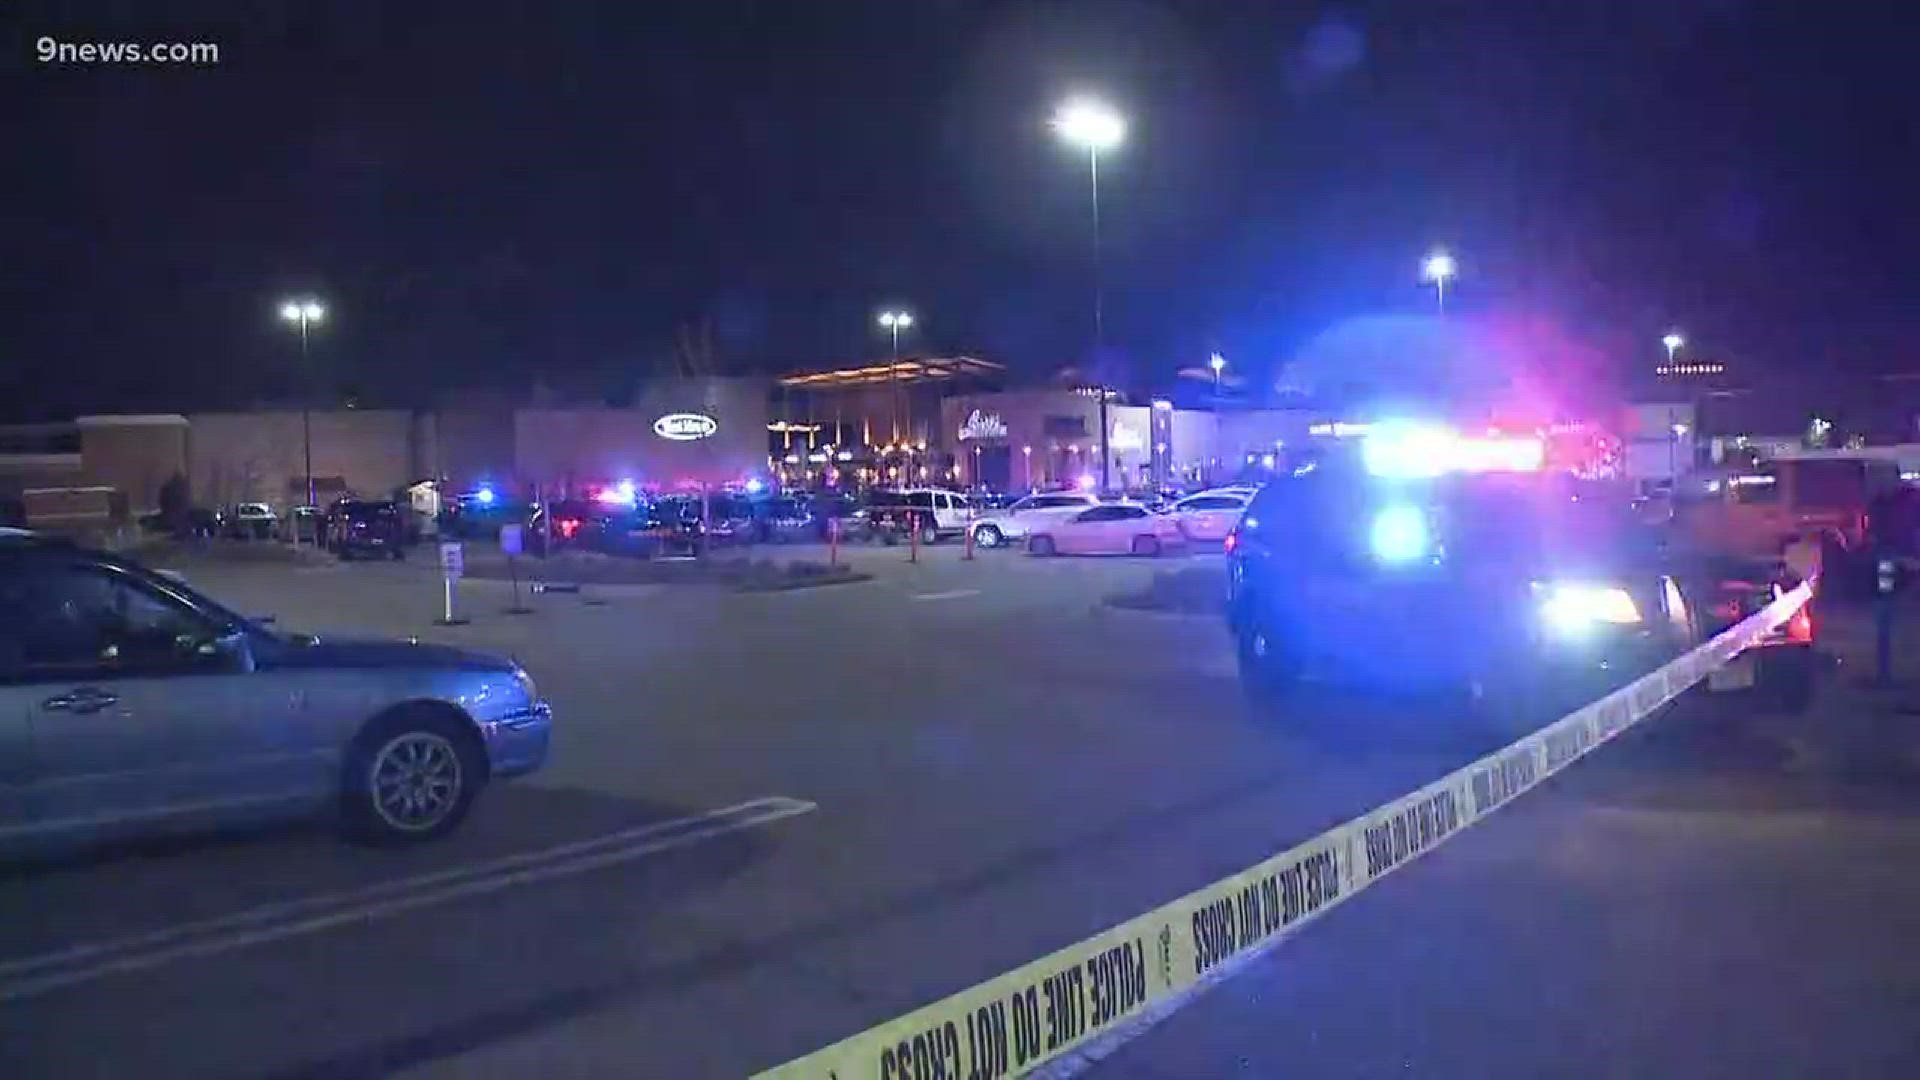 A theft suspect with a lengthy criminal history was shot and killed by an officer in the mall parking lot on Thursday night.